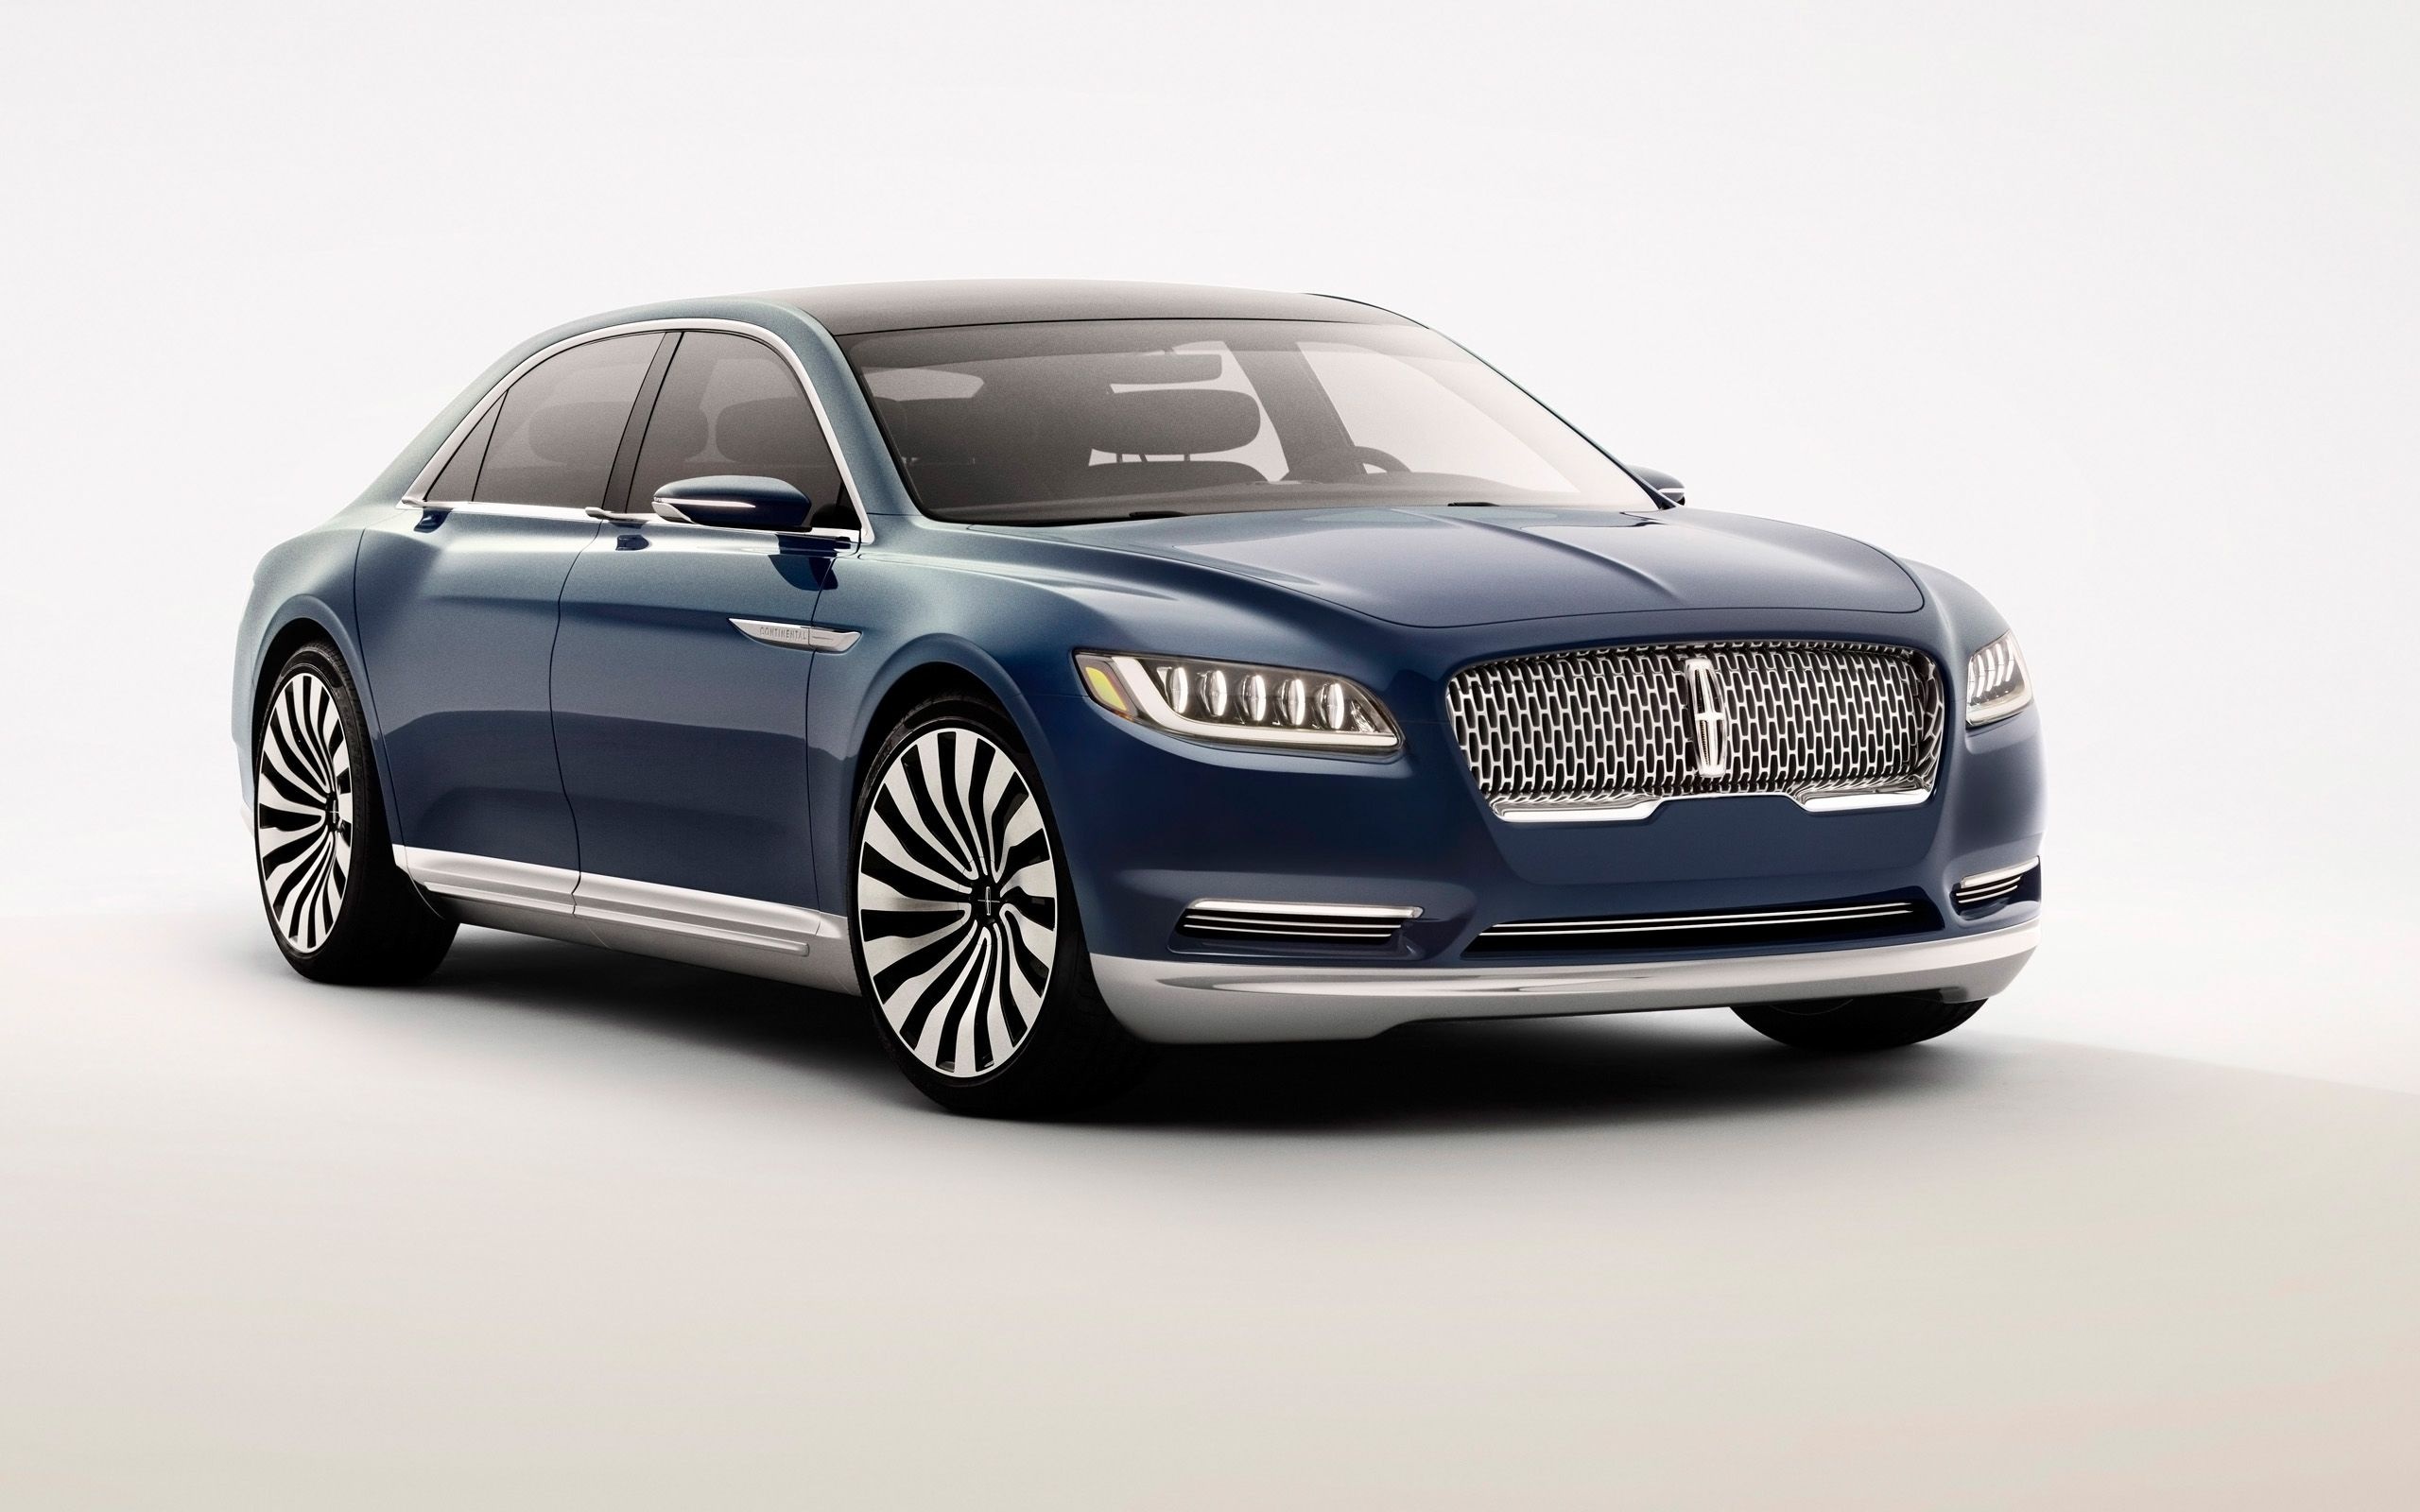 Lincoln Continental wallpapers, Top free, Auto backgrounds, Cars, 2560x1600 HD Desktop